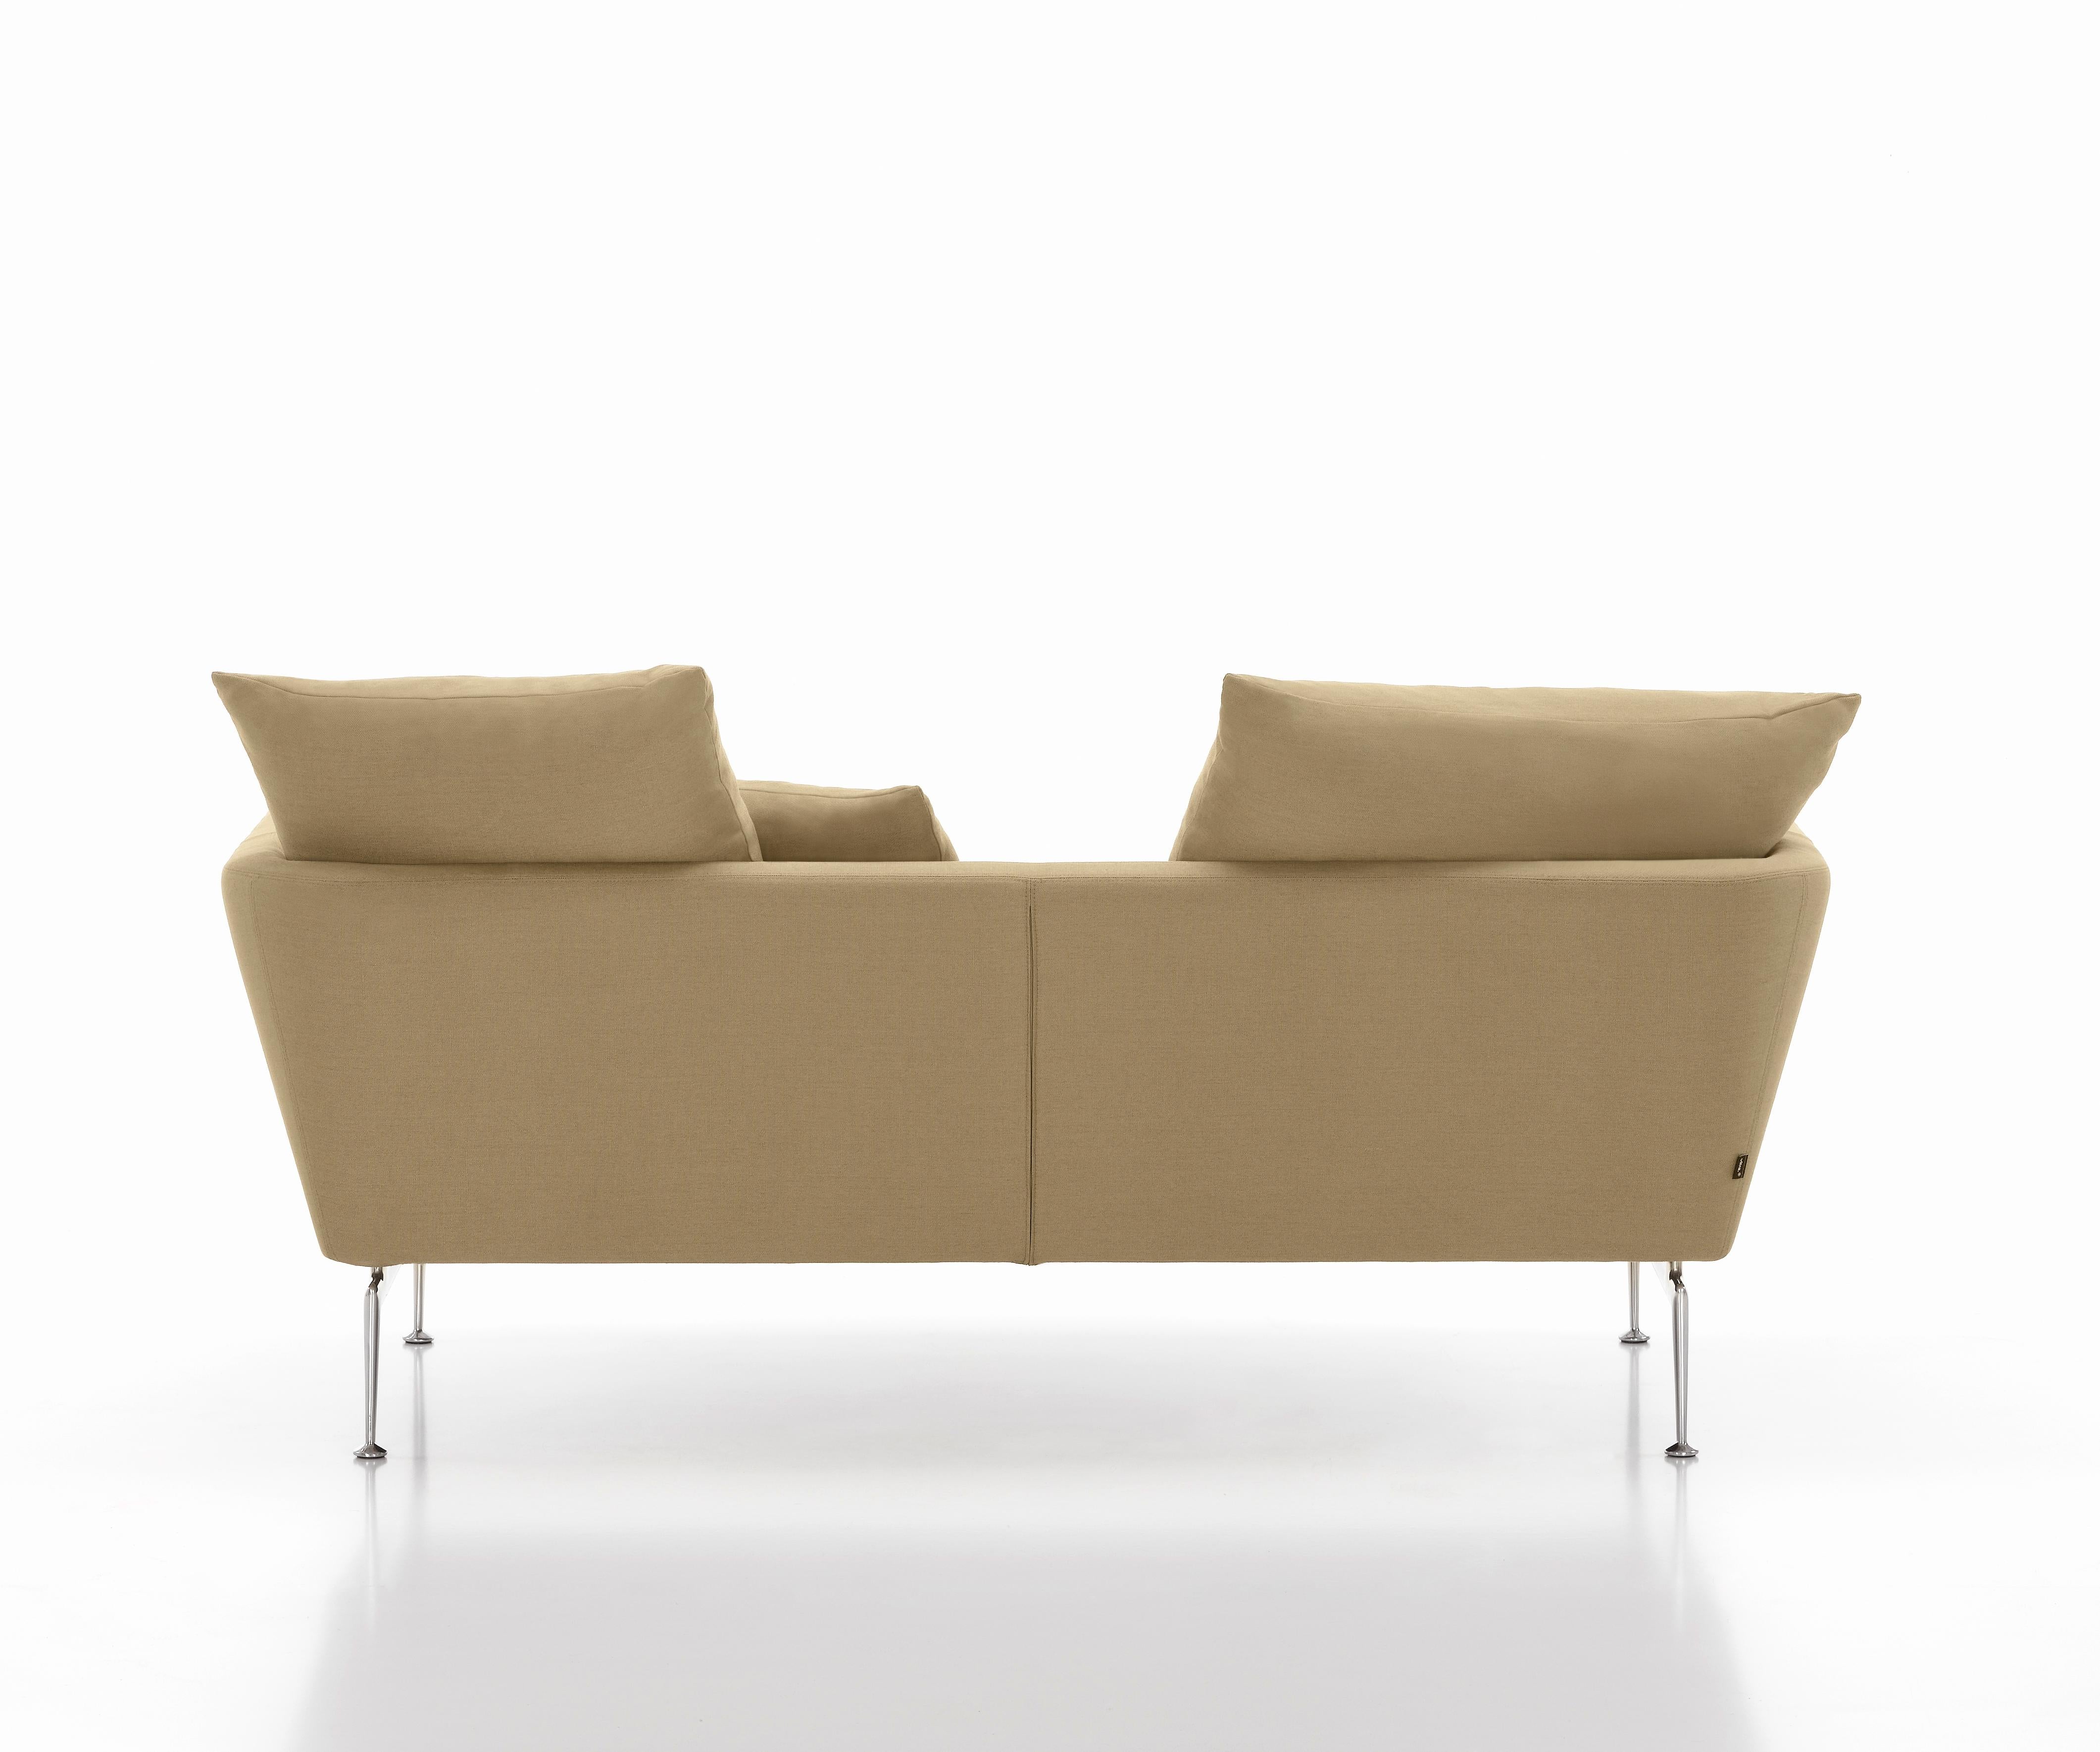 Modern Vitra Suita Sofa Two-Seat in Parchment Olimpo by Antonio Citterio For Sale